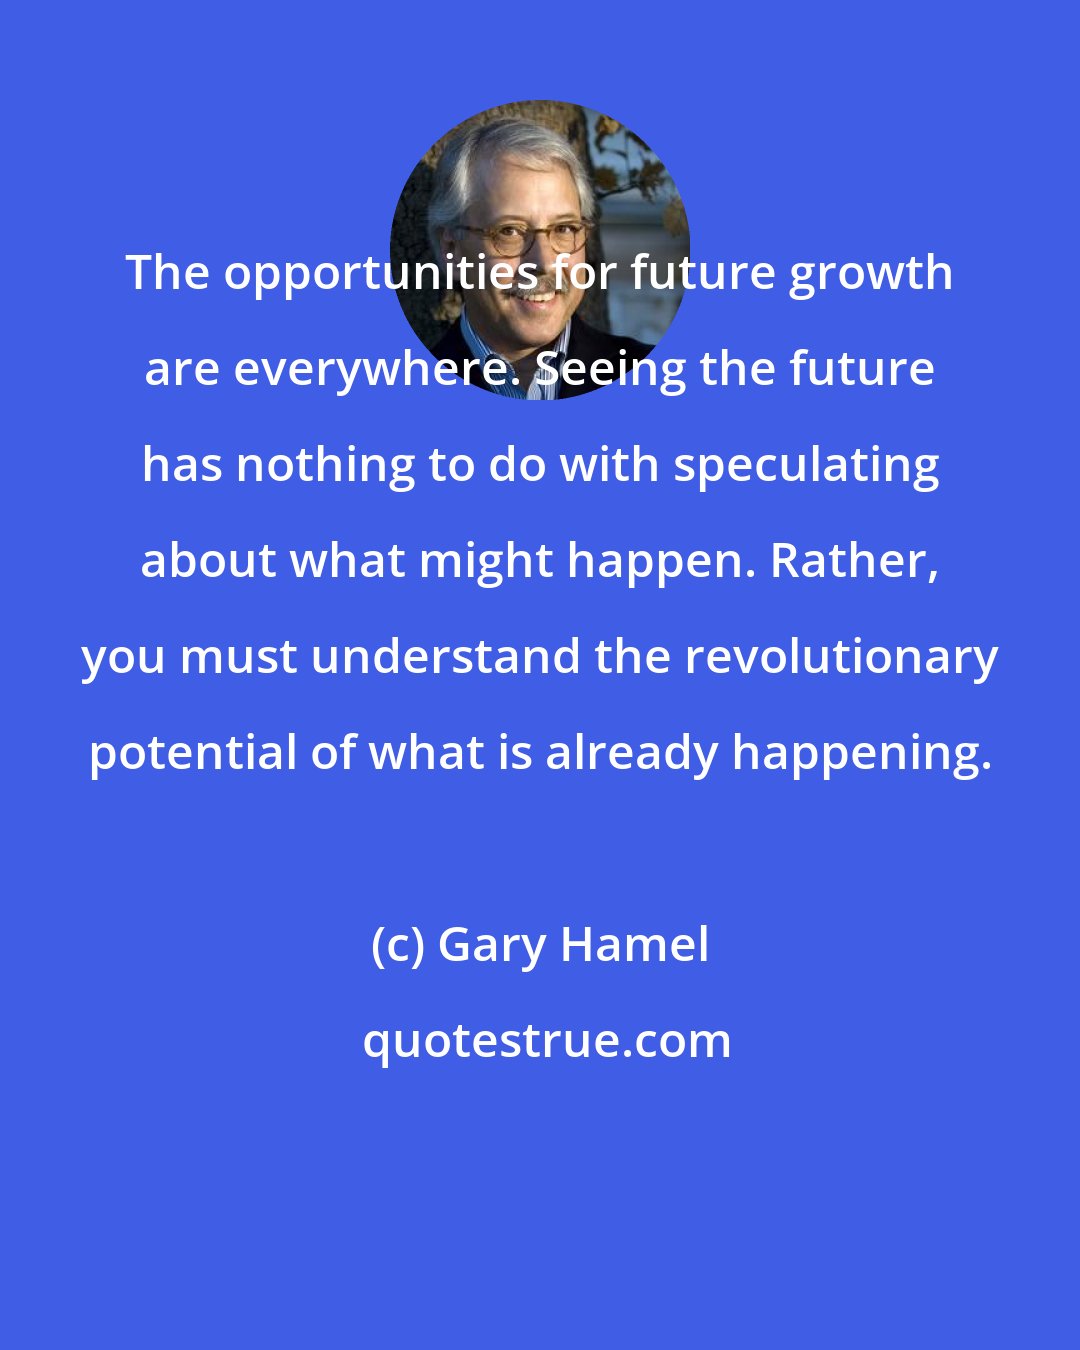 Gary Hamel: The opportunities for future growth are everywhere. Seeing the future has nothing to do with speculating about what might happen. Rather, you must understand the revolutionary potential of what is already happening.